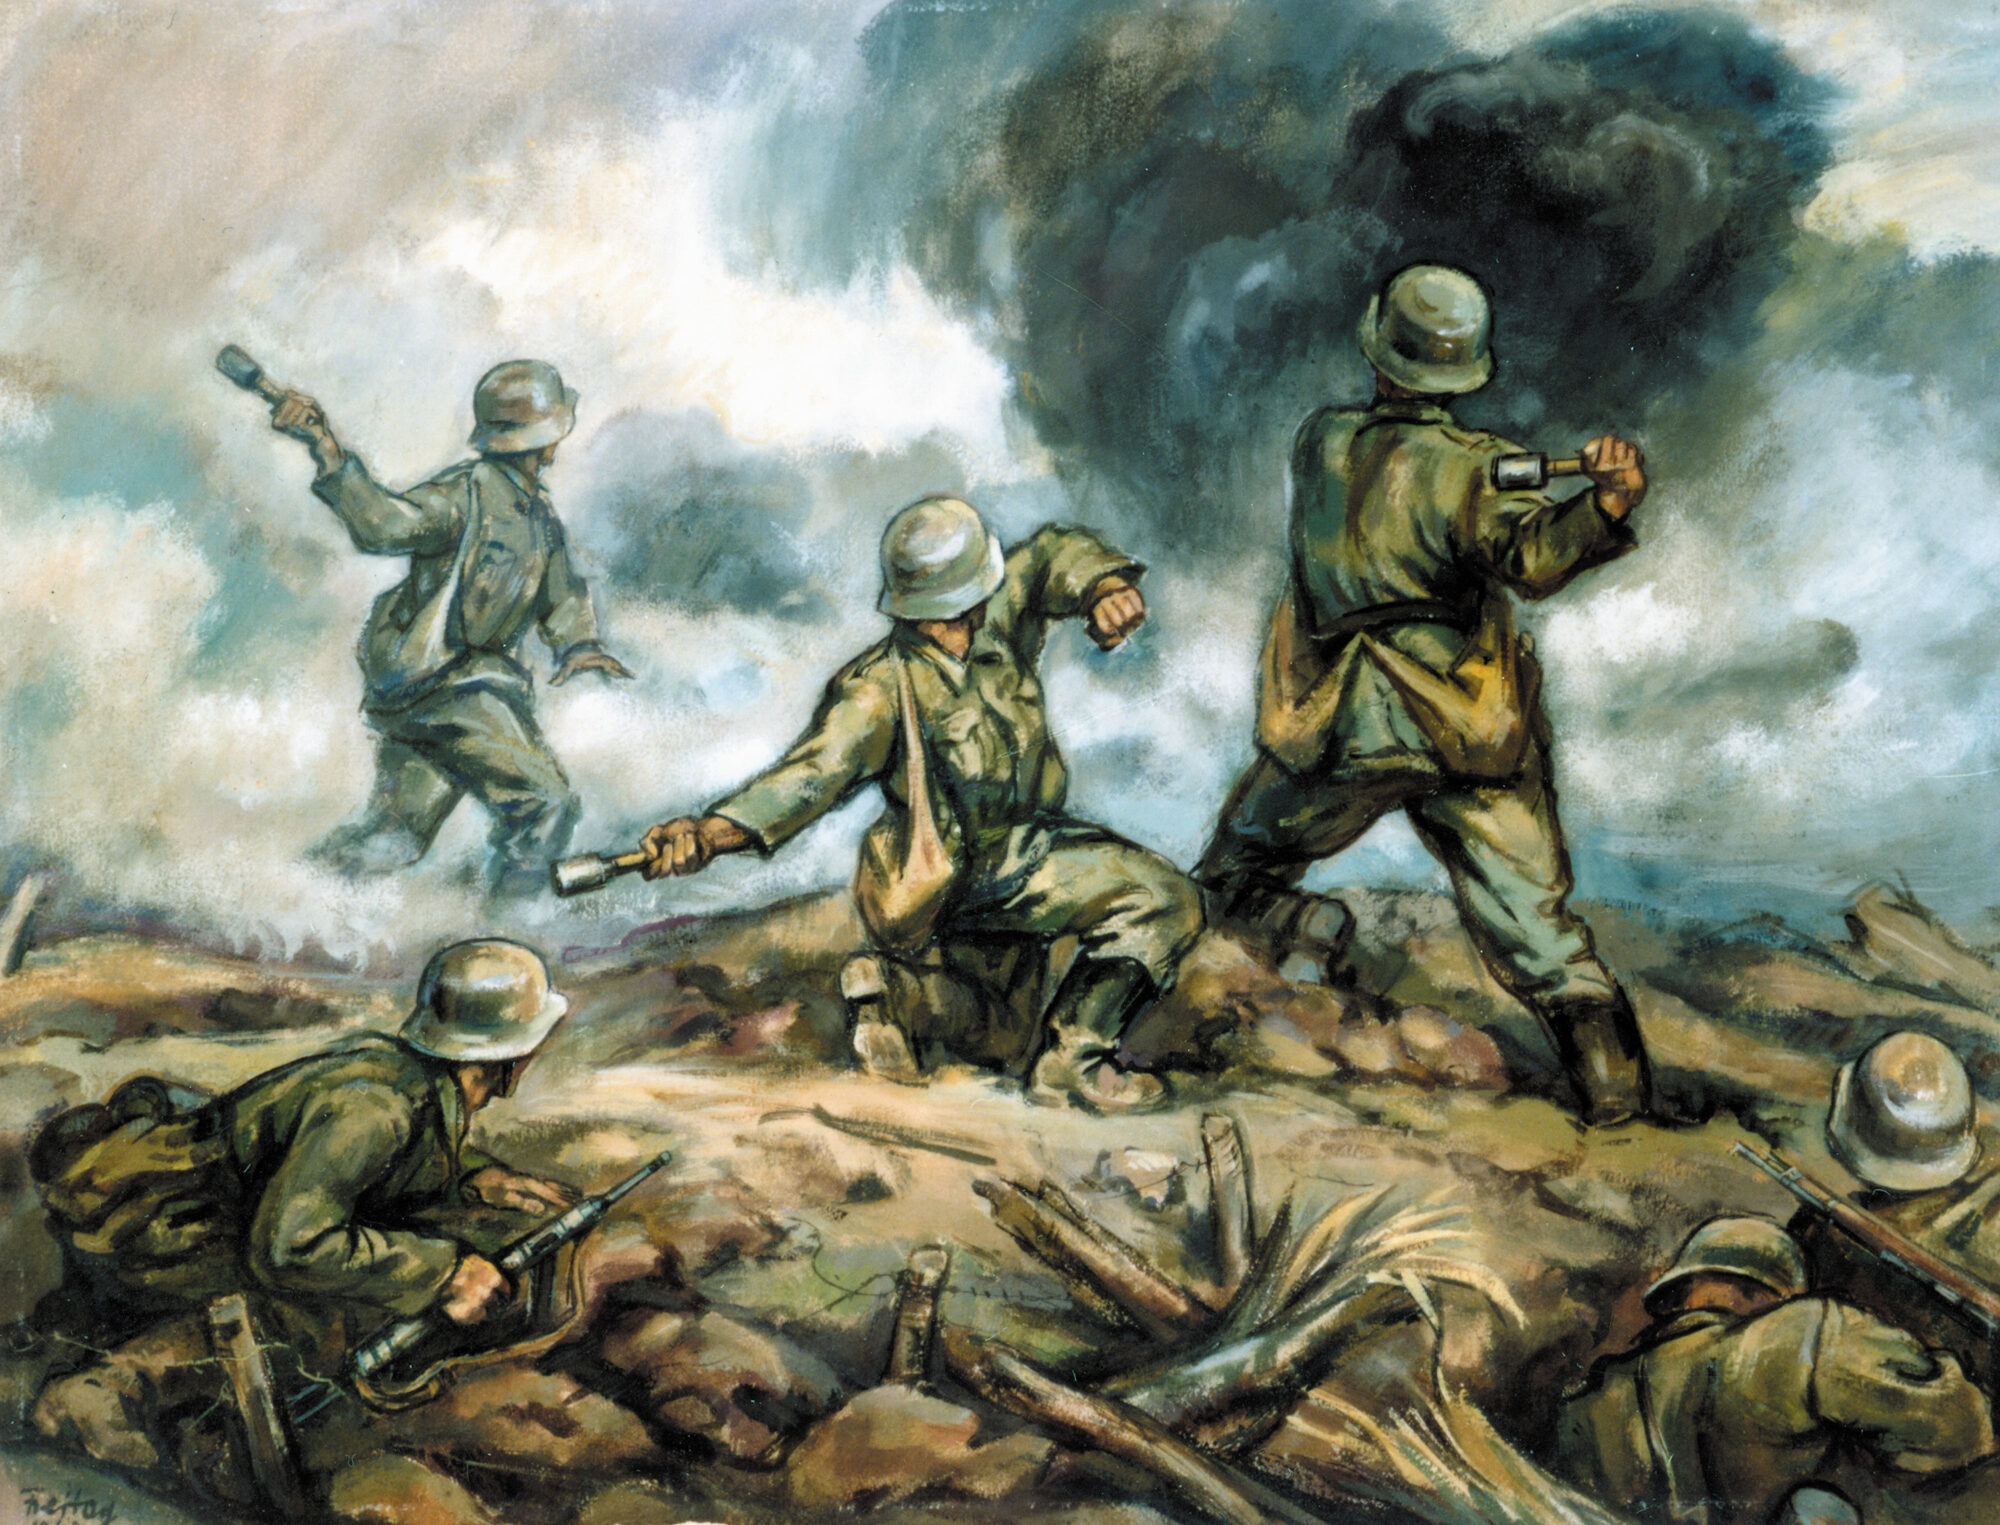 Defending their position on a battle-scarred Russian steppe, German infantrymen hurl potatomasher grenades through a pall of smoke toward the attacking Red Army.